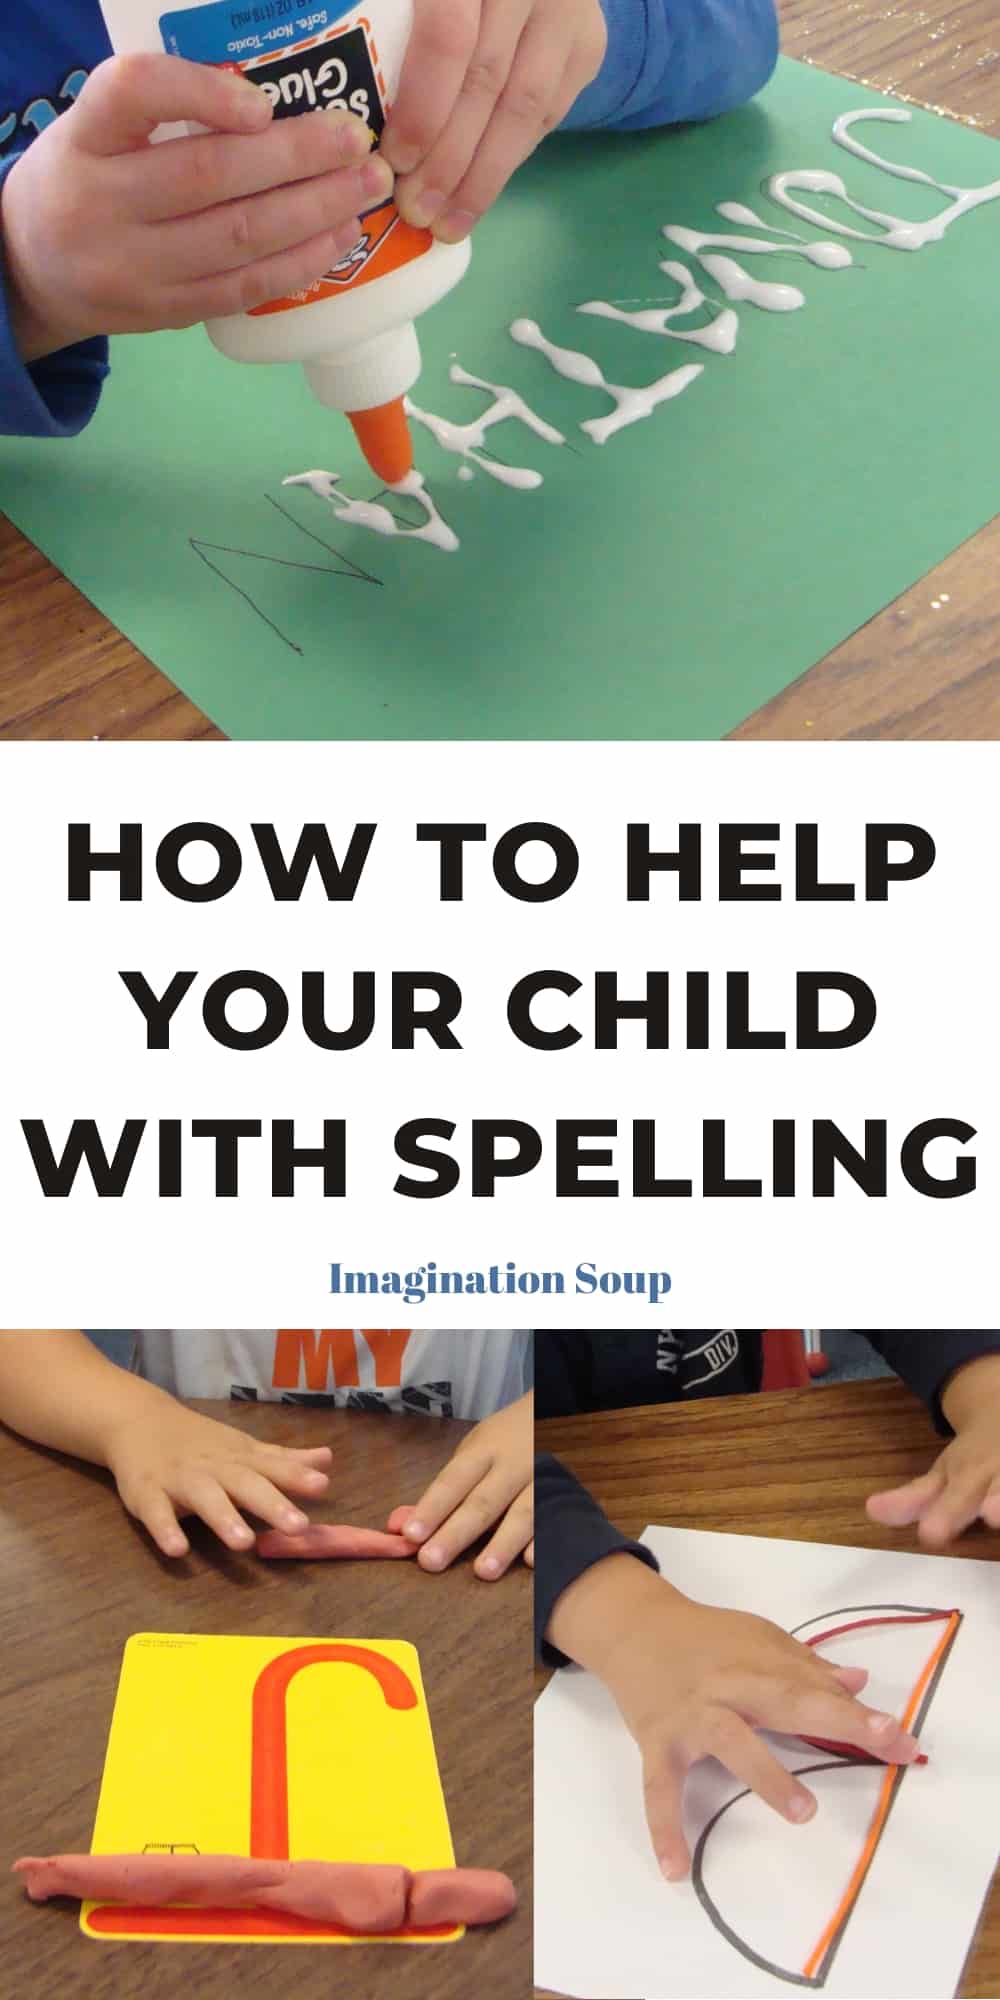 How to Help Your Child with Spelling